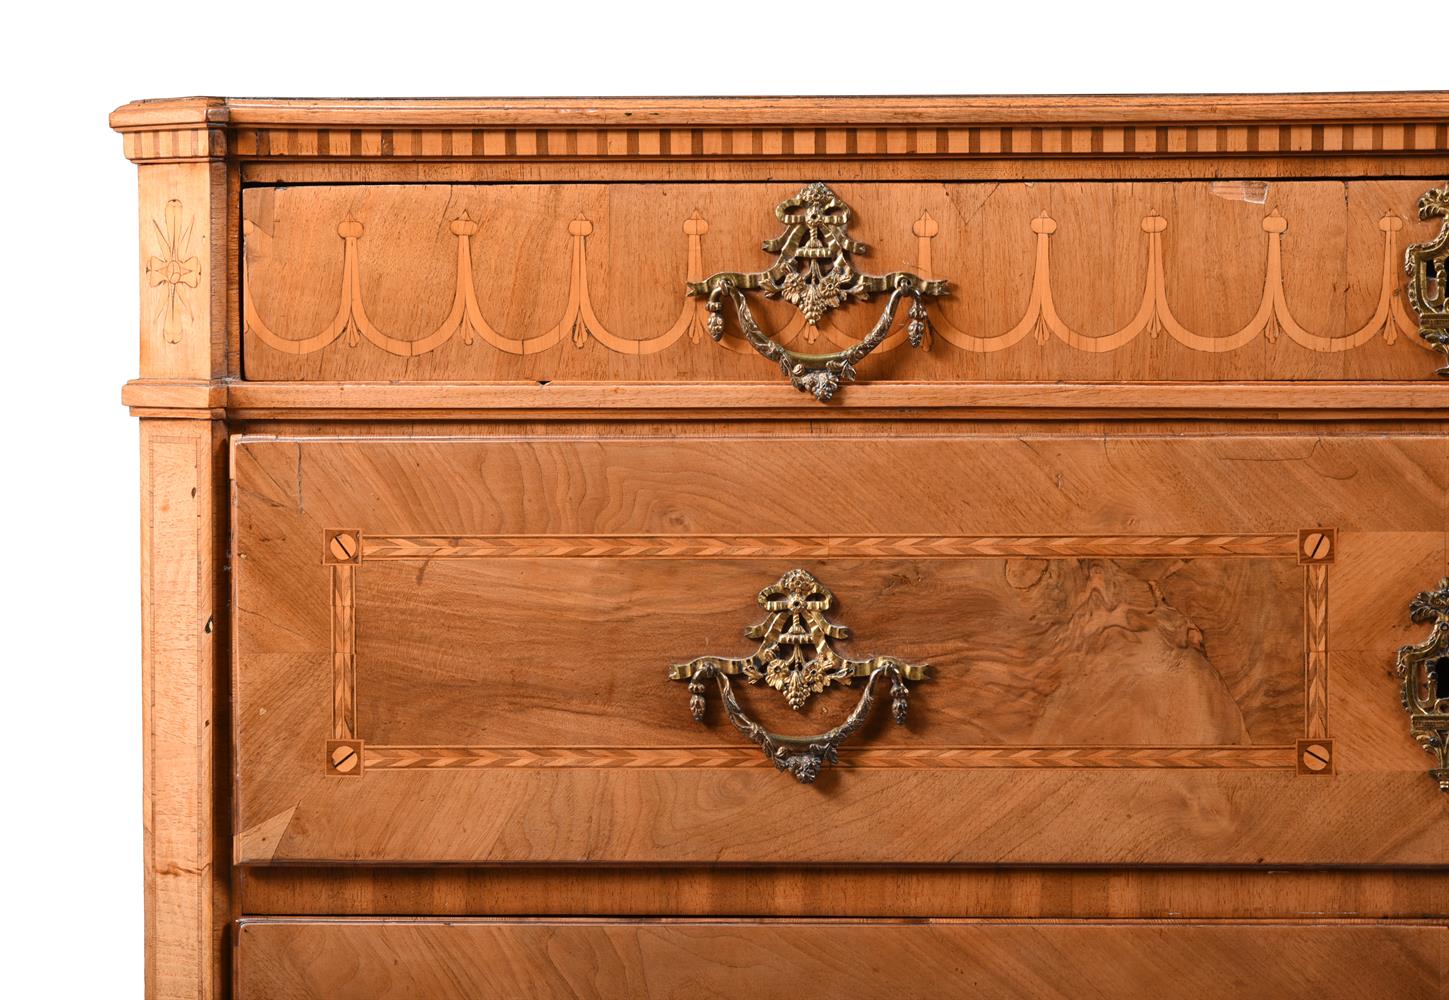 A CONTINENTAL WALNUT, FIGURED WALNUT, MARQUETRY AND PARQUETRY DECORATED COMMODE - Image 3 of 7